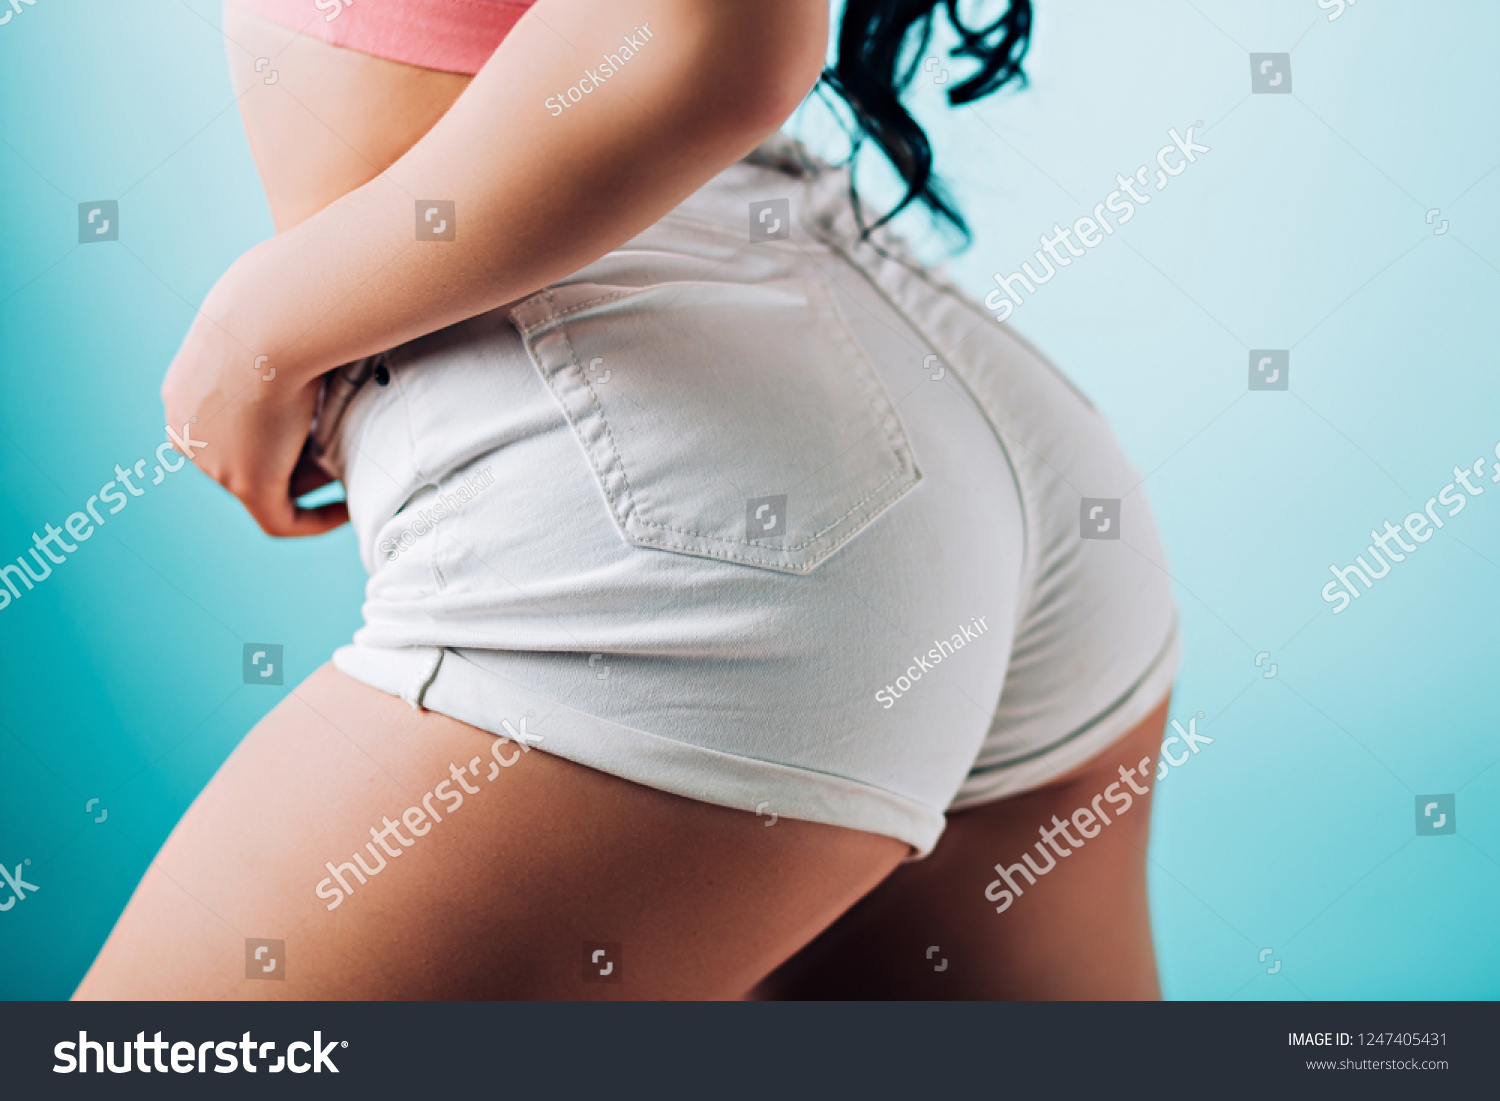 Pictures Of Big Booty Women